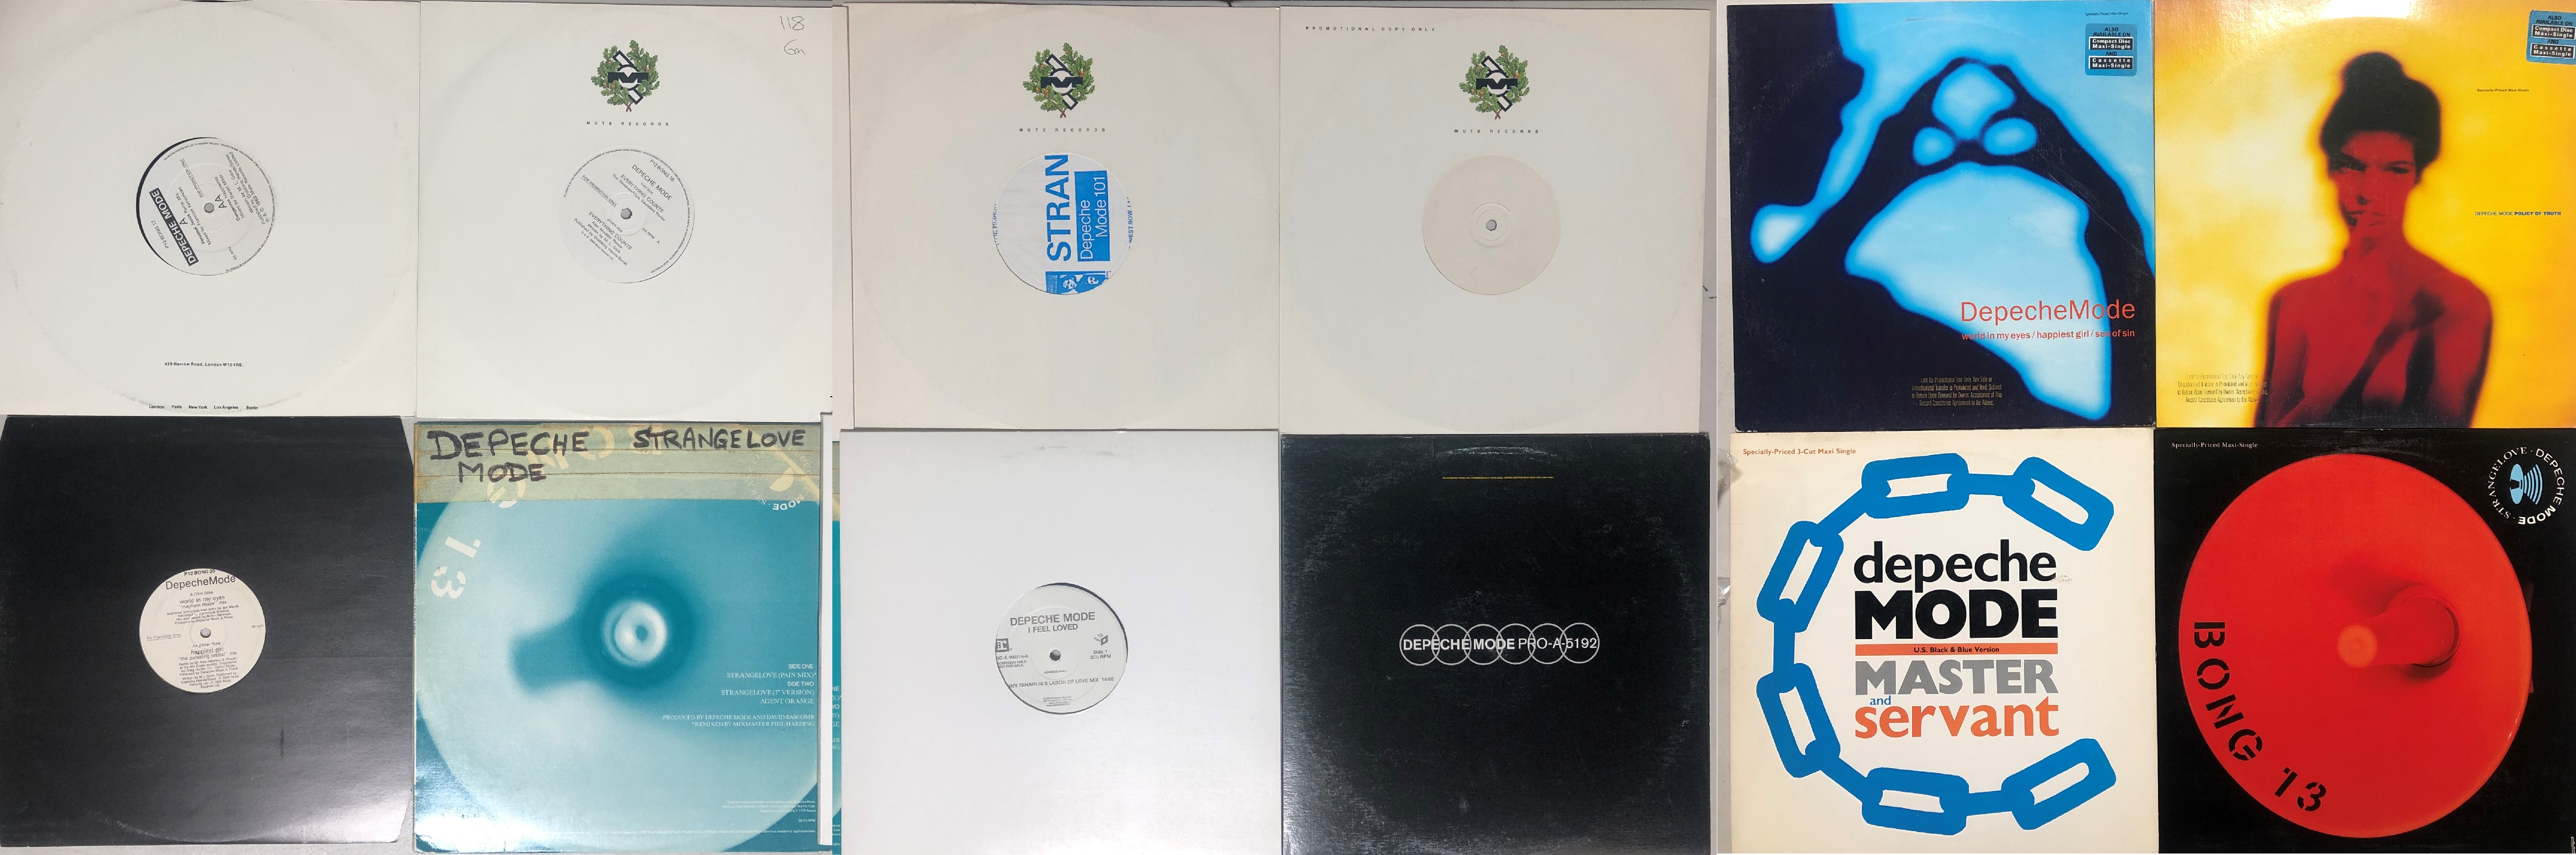 DEPECHE MODE - UK & US 12 PROMOS. Major collection of 12 x 12" promos from Depeche Mode.